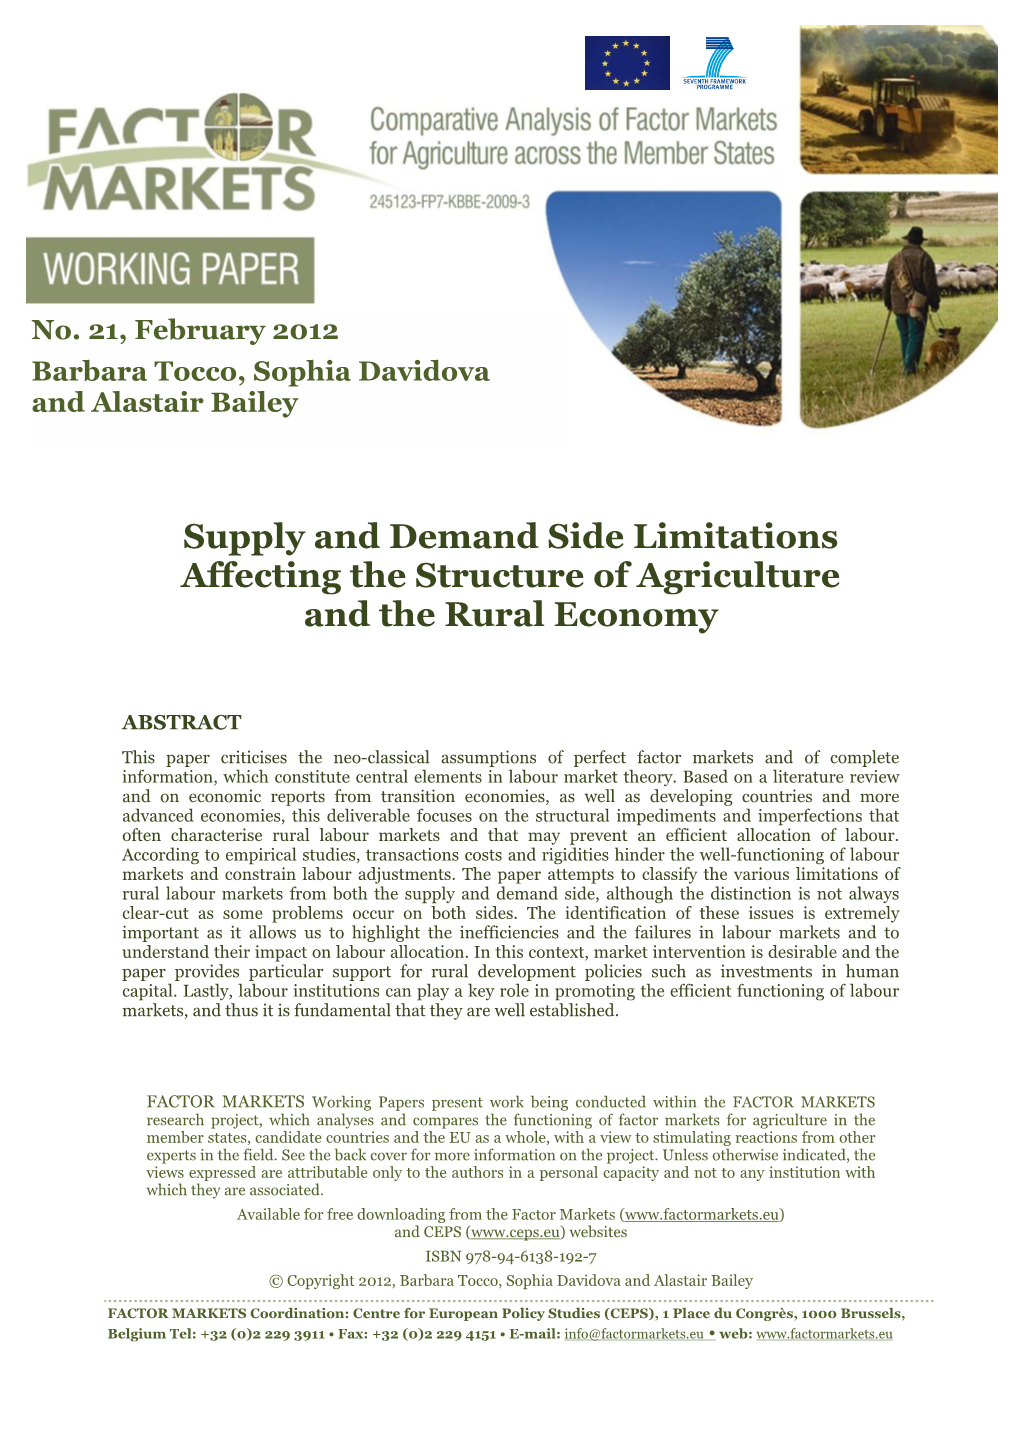 Supply and Demand Side Limitations Affecting the Structure of Agriculture and the Rural Economy